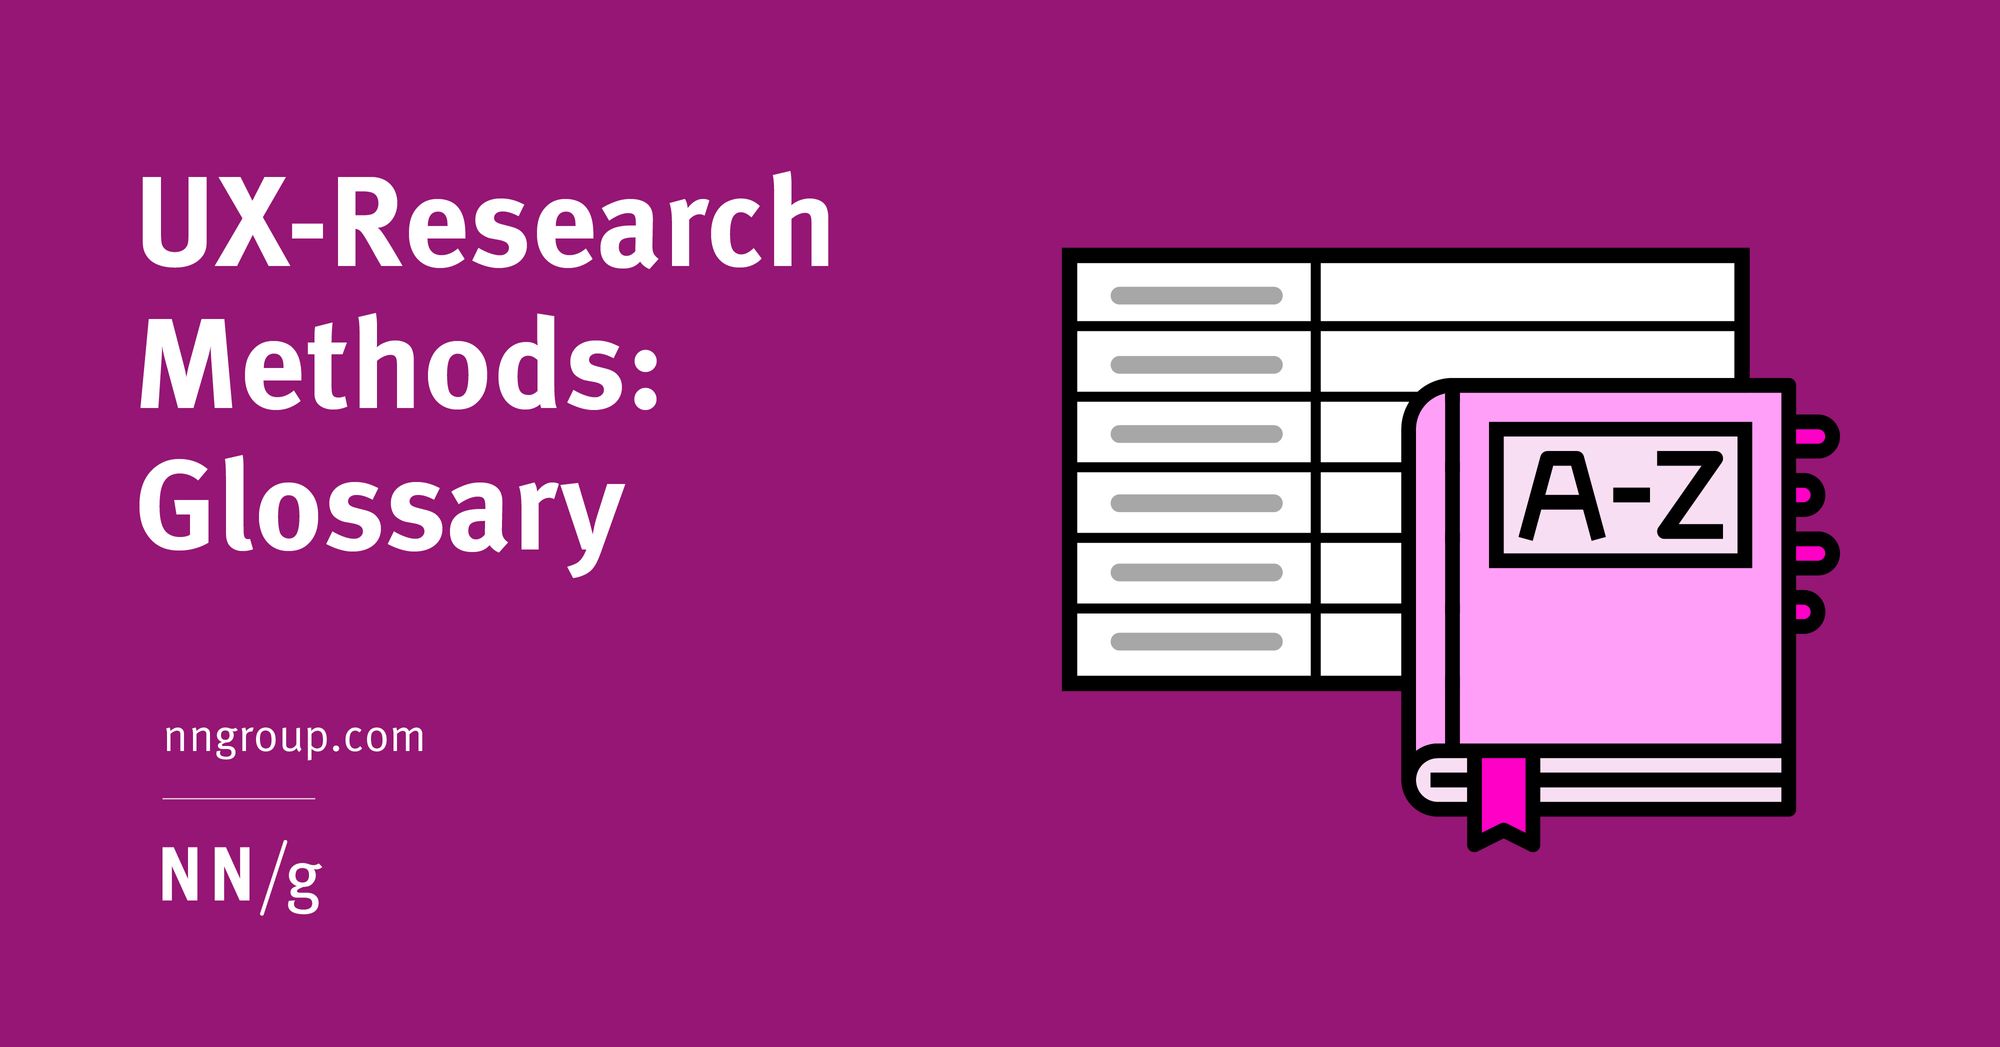 UX Research Methods: Glossary